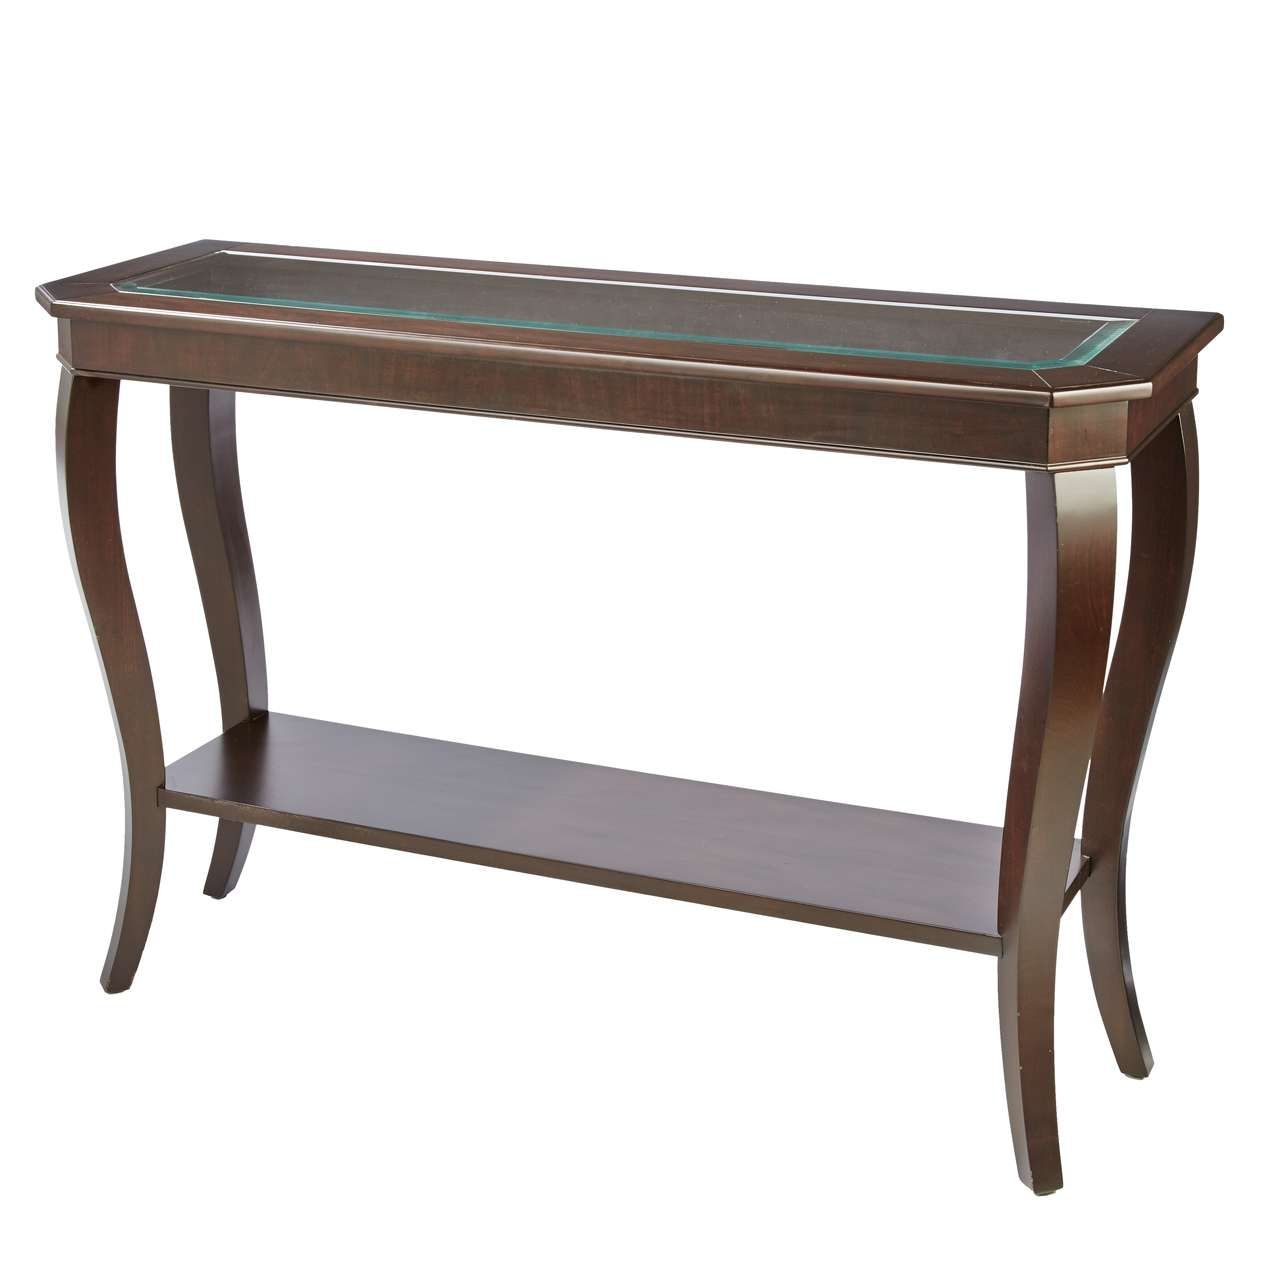 Current Bombay Coffee Tables Pertaining To Chelsea Console Table – Bombay Canada (View 7 of 20)